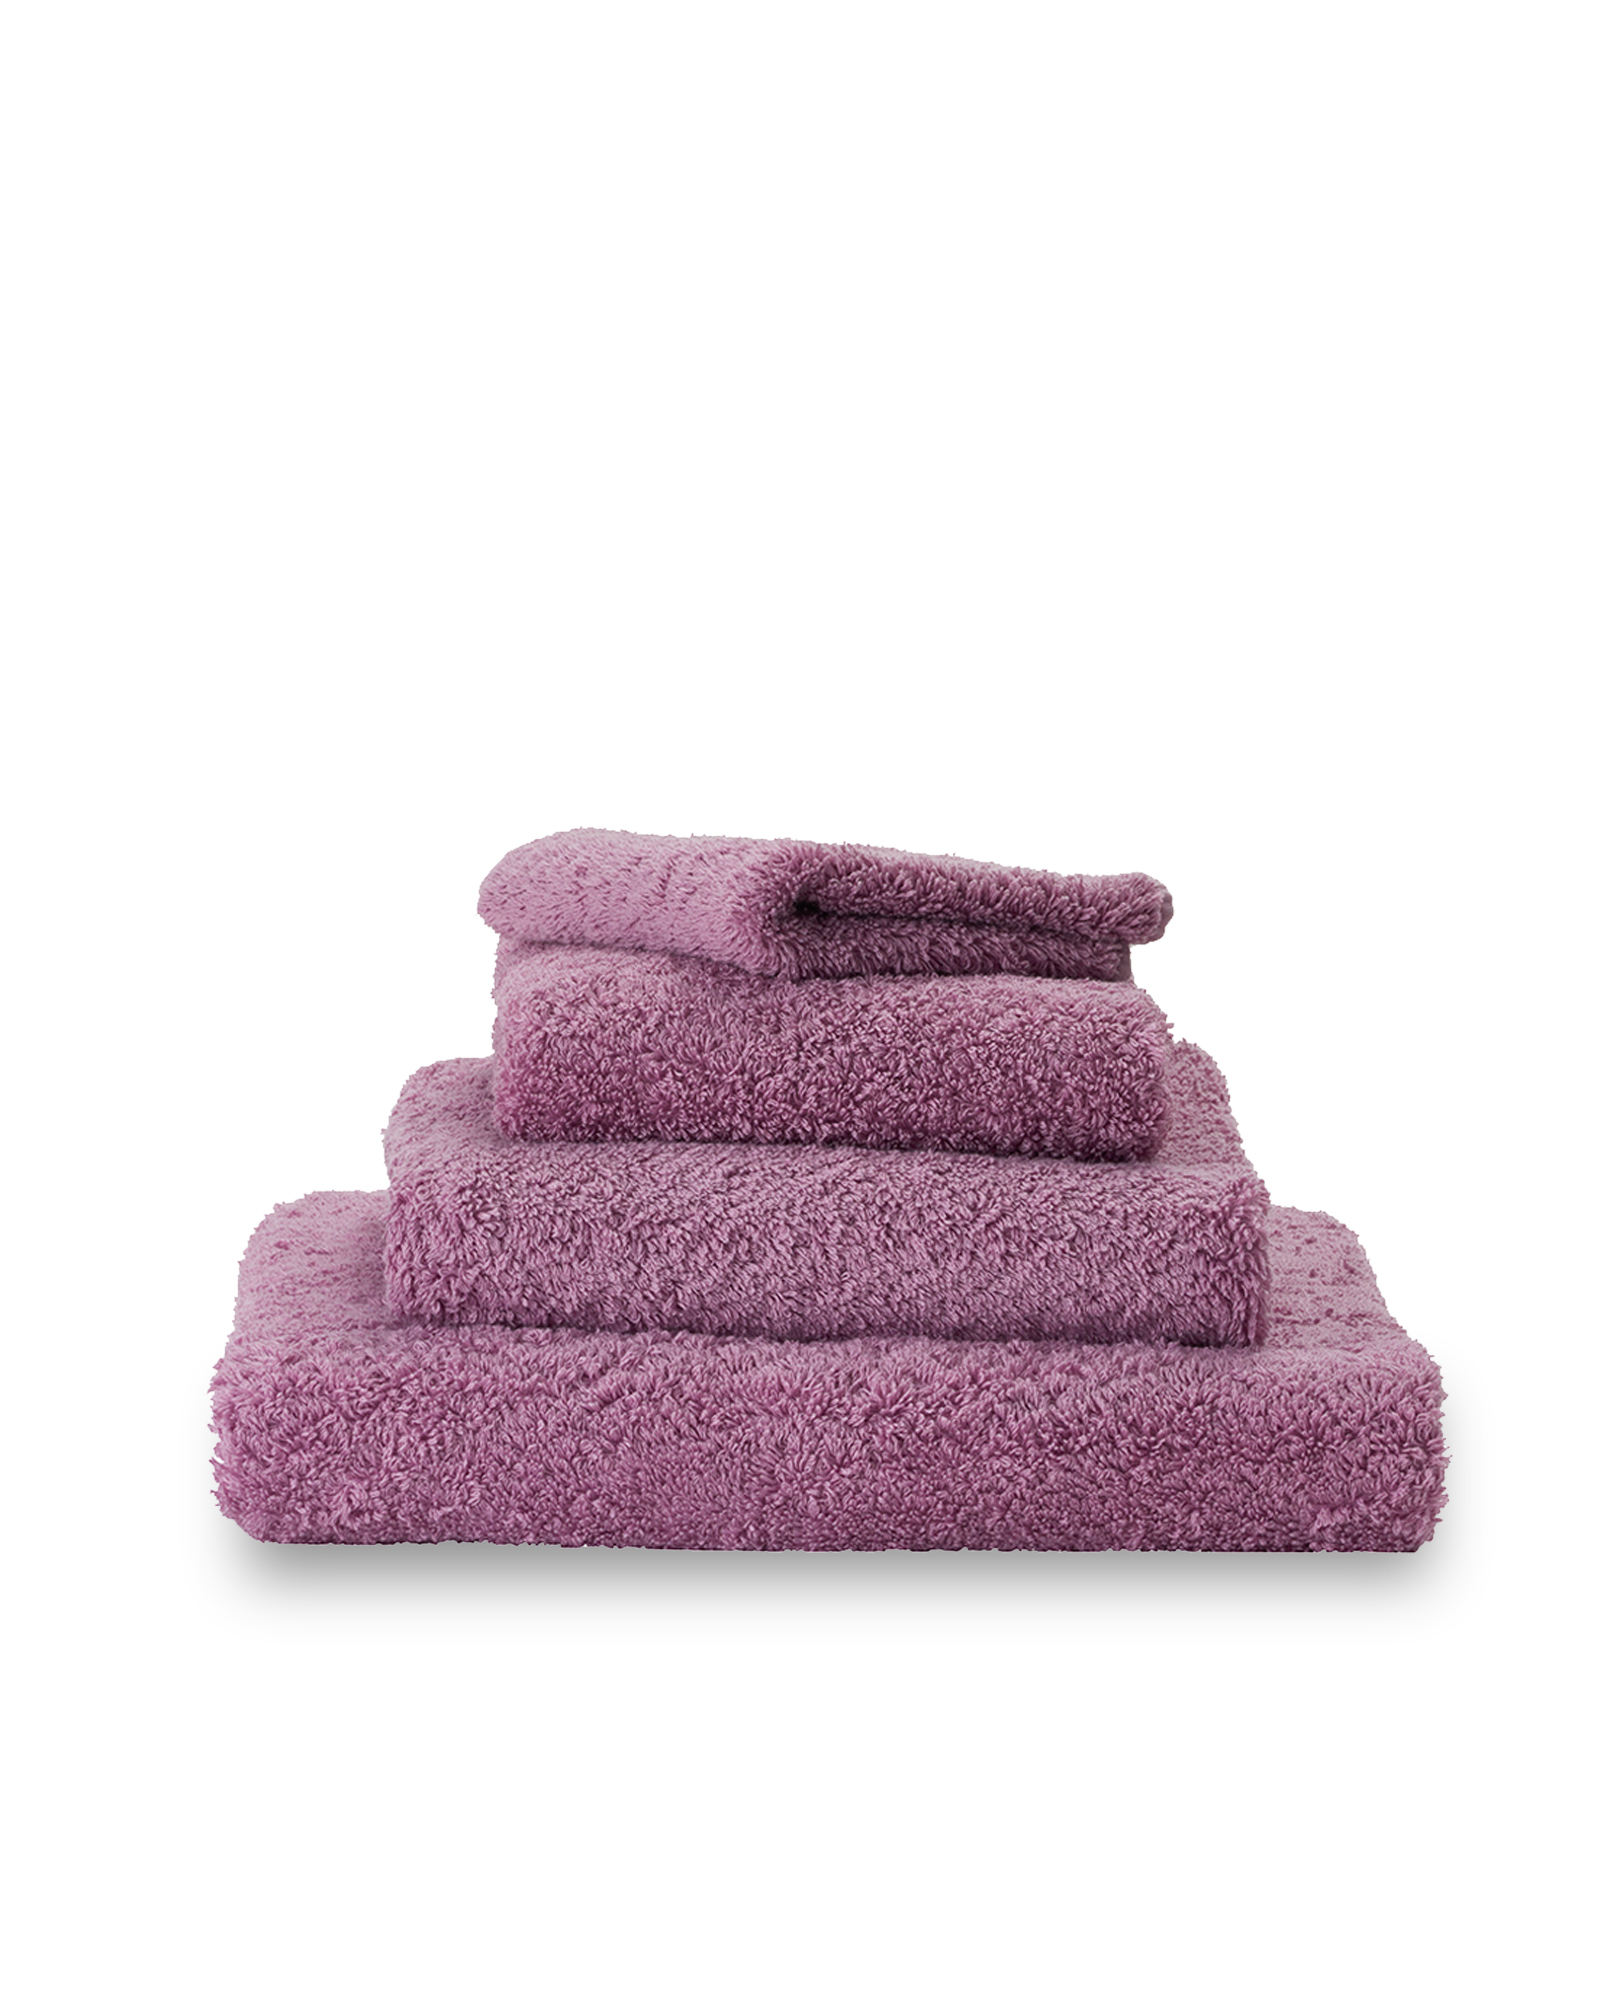 Abyss & Habidecor - Hand towel SUPER PILE 440 Orchid - 55x100 cm - 440 Orchid 